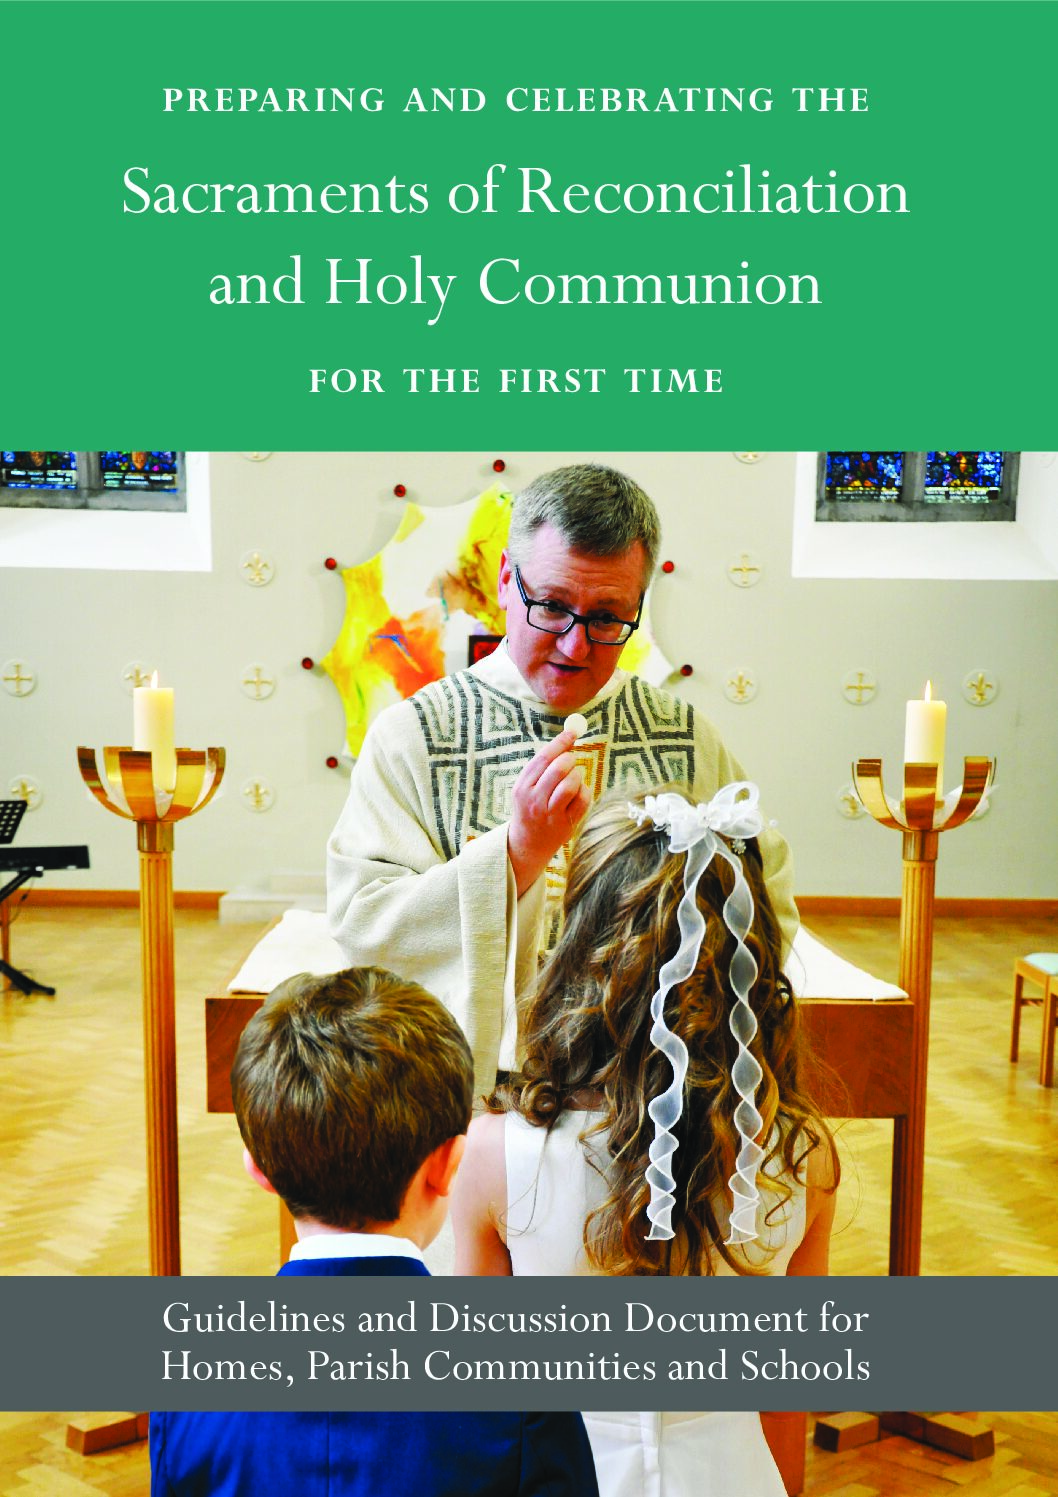 Preparing and Celebrating the Sacraments of Reconciliation and Holy Communion